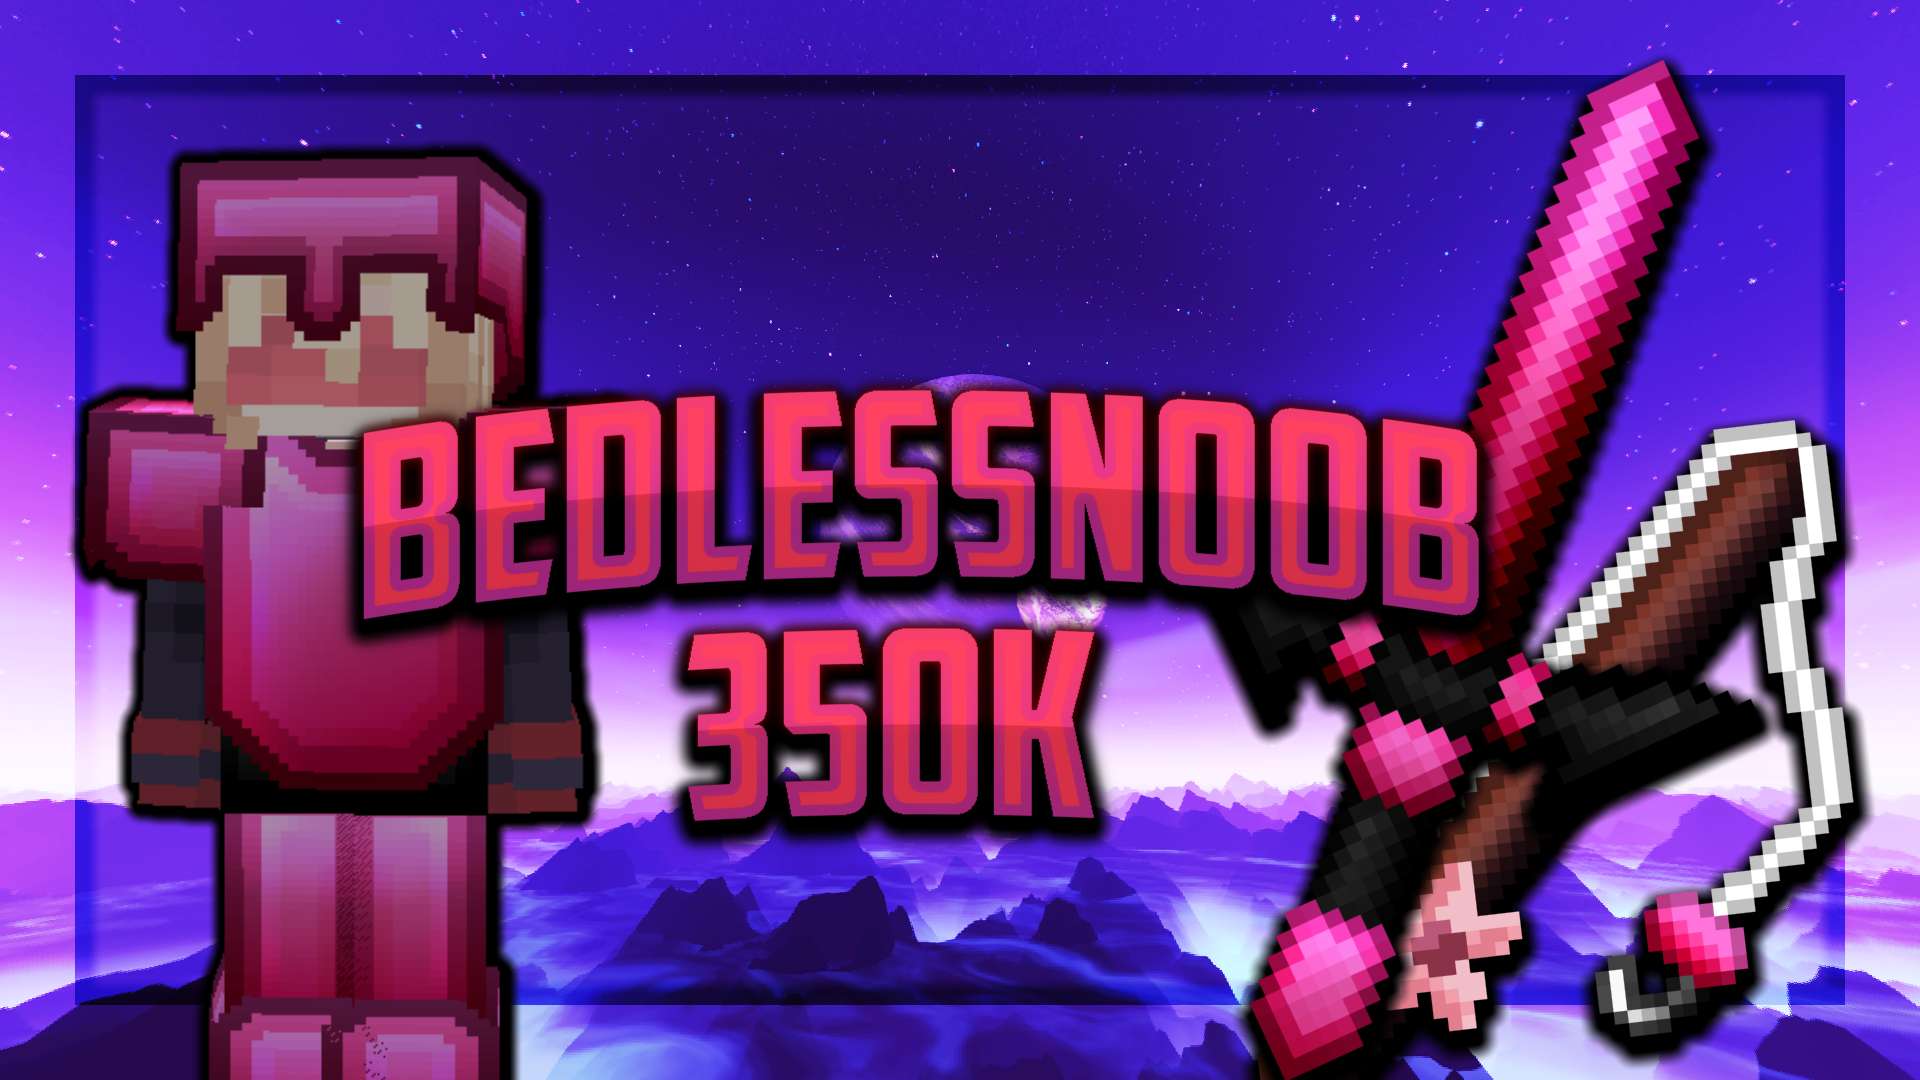 Gallery Banner for Bedless Noob 350k on PvPRP